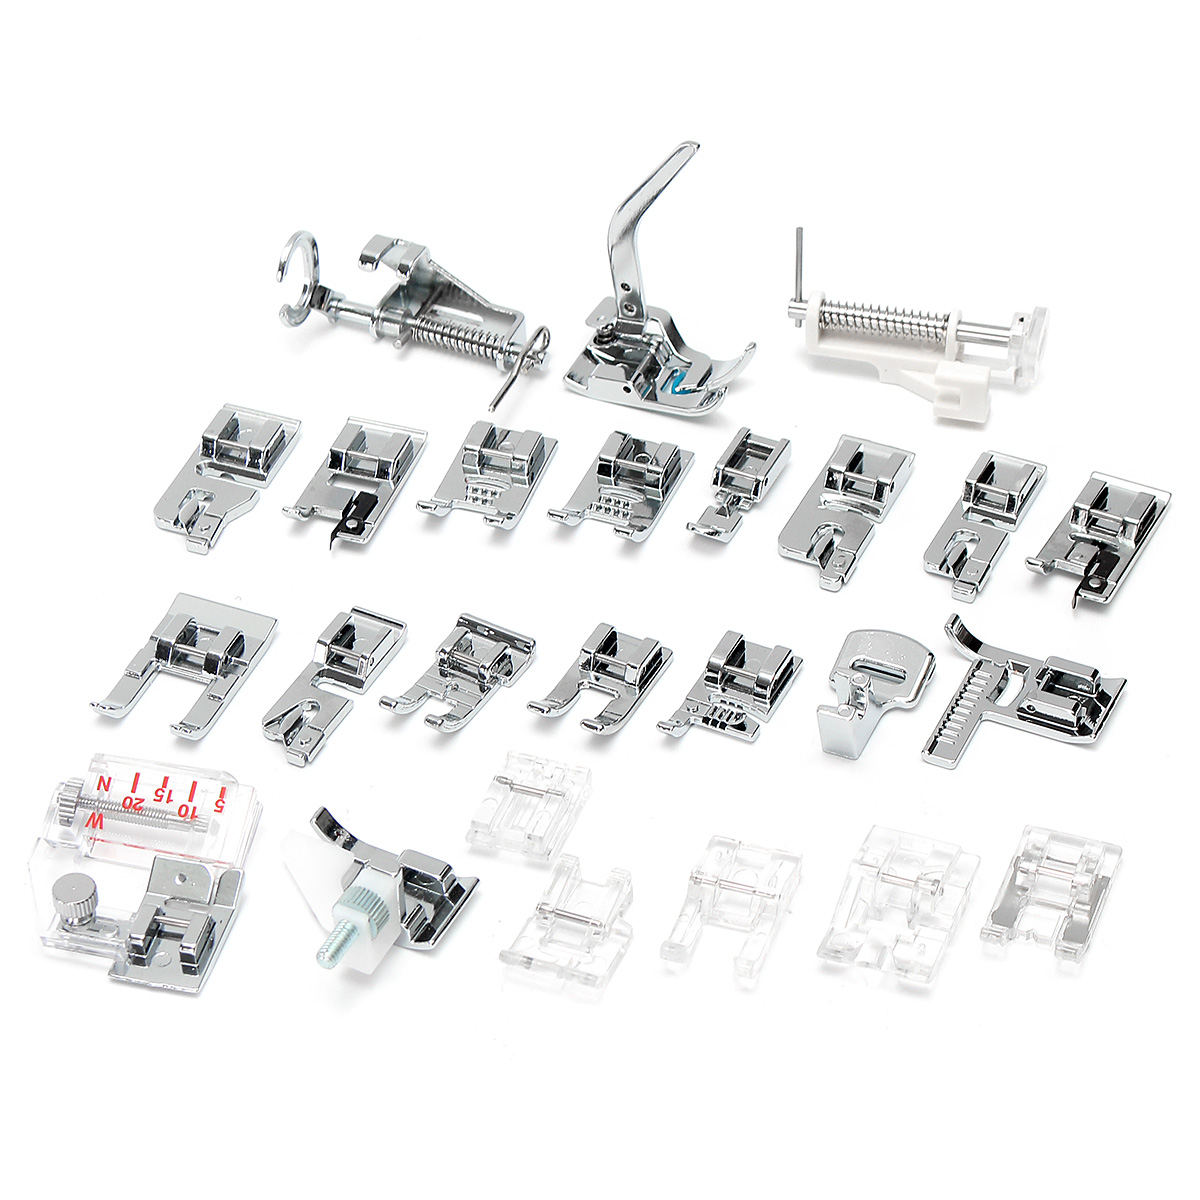 

52Pcs Domestic Sewing Machine Tools Accessories Foot Presser Feet Kit For Singer Brother Janome